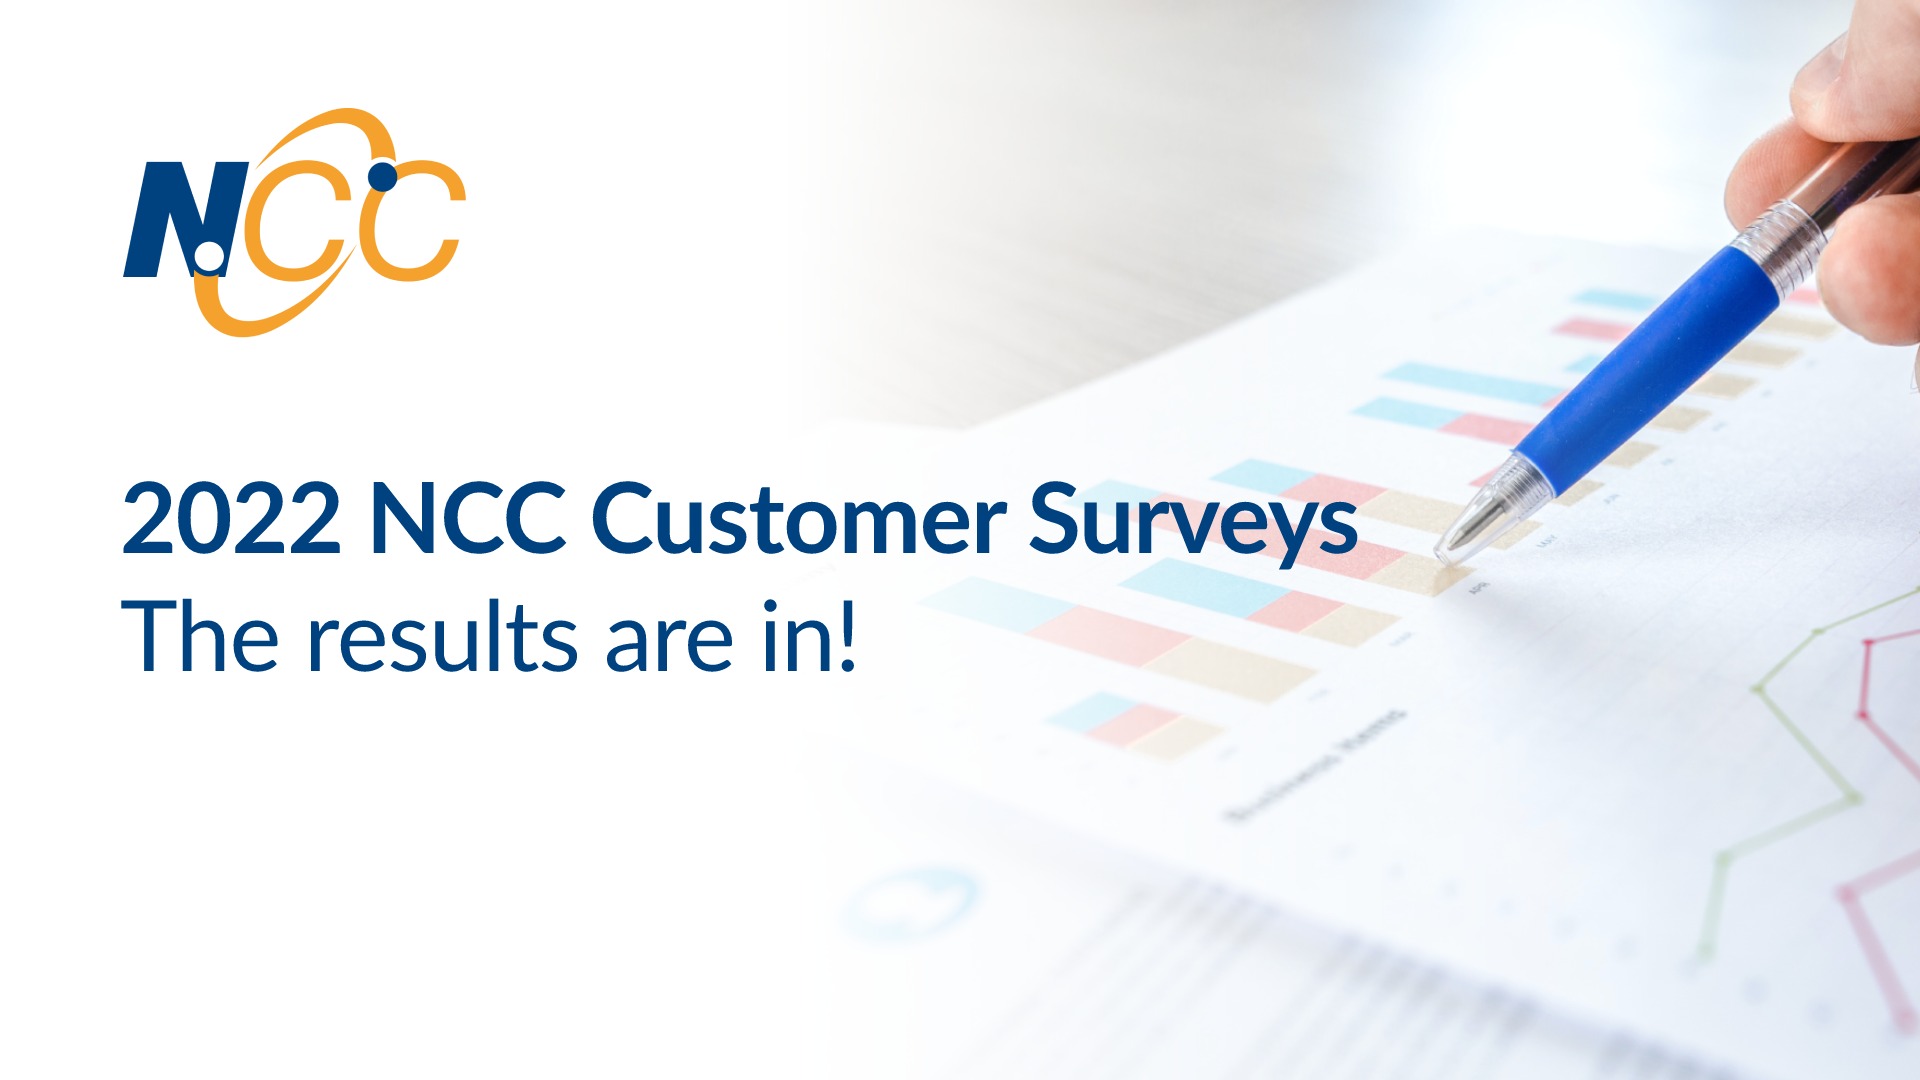 2022 NCC Customer Surveys – The results are in!